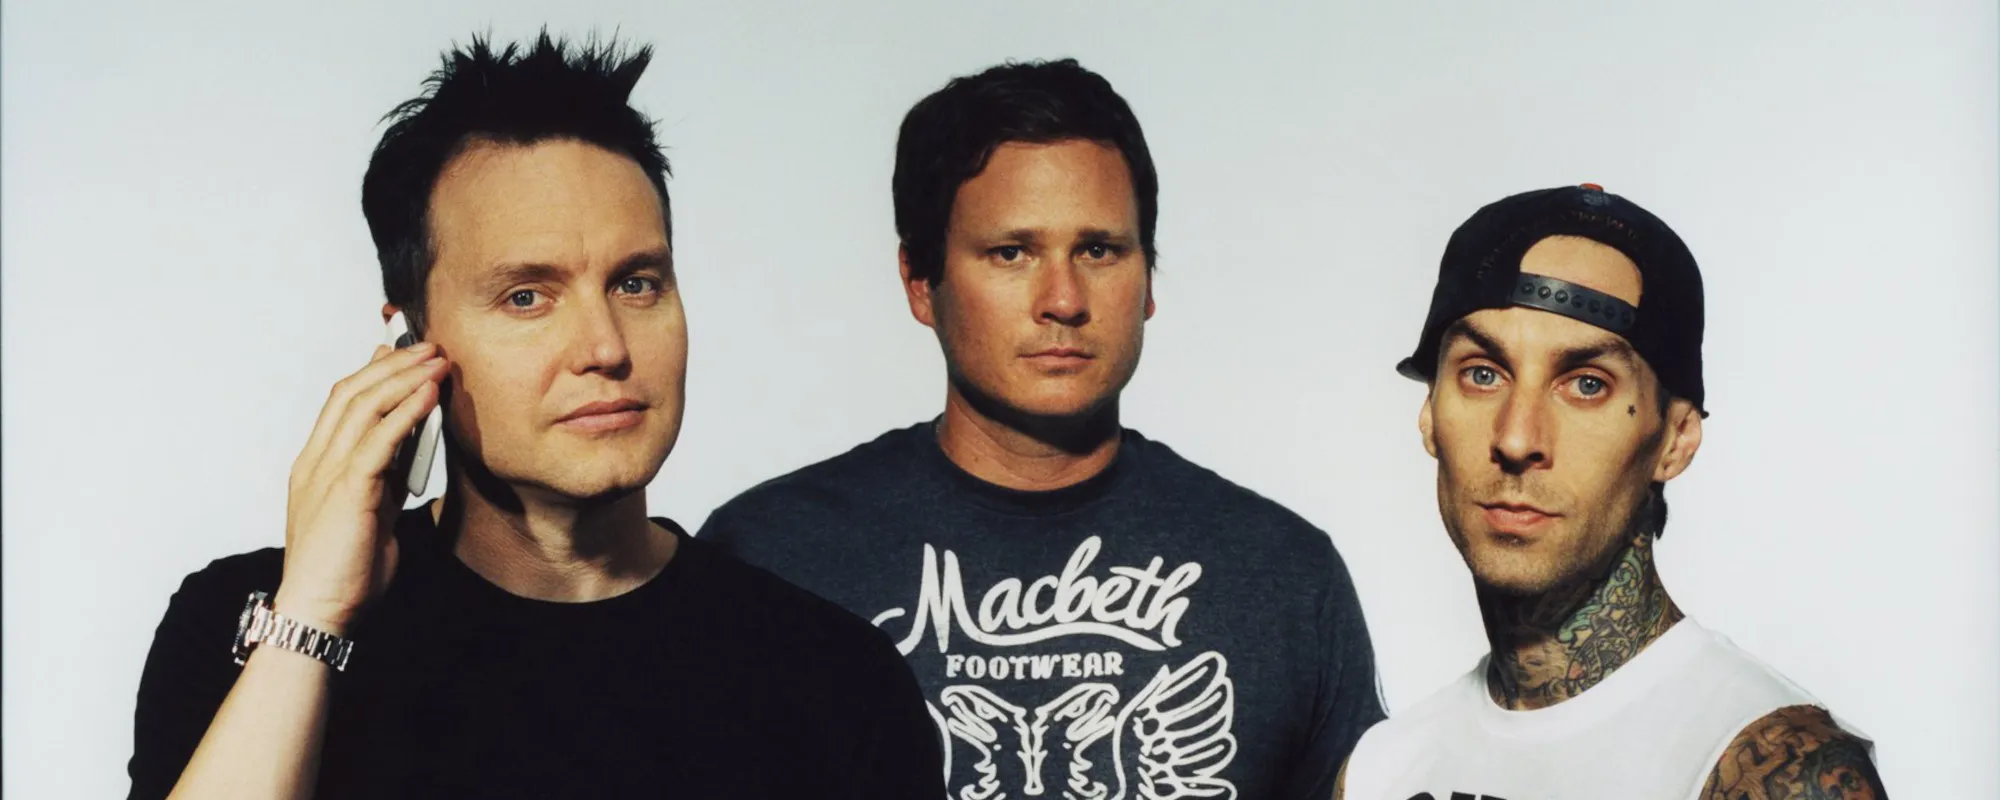 “Next Phase” of Blink-182 in the Works?